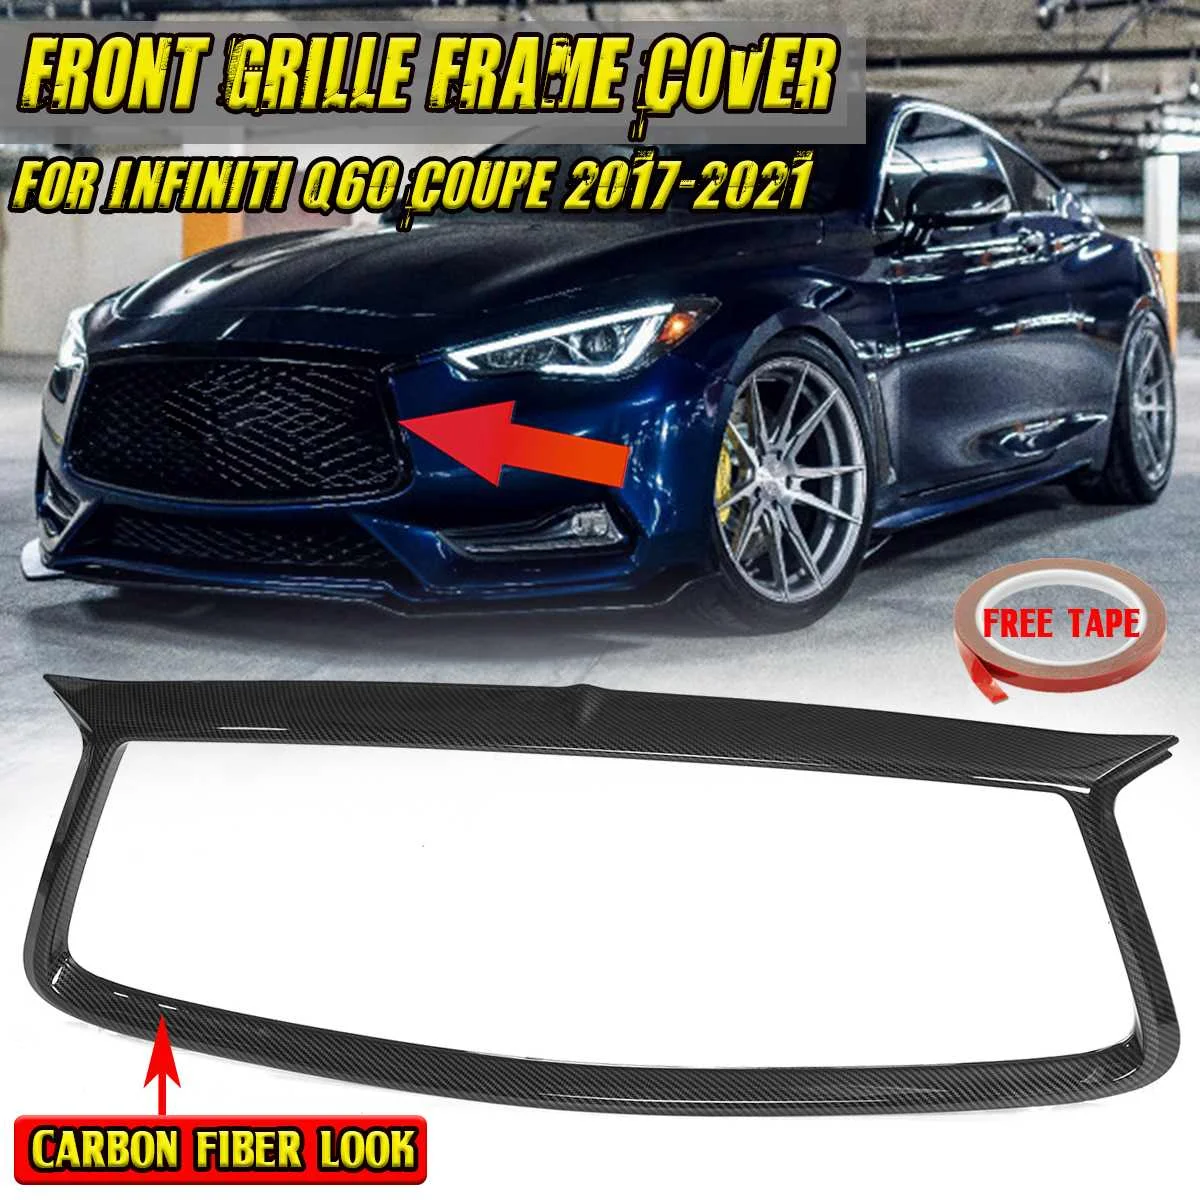 

New Car Front Grille Grill Frame Cover Outline Trim Cover Overlay For Infiniti Q60 Coupe 2017-2021 Front Grille Protector Guard